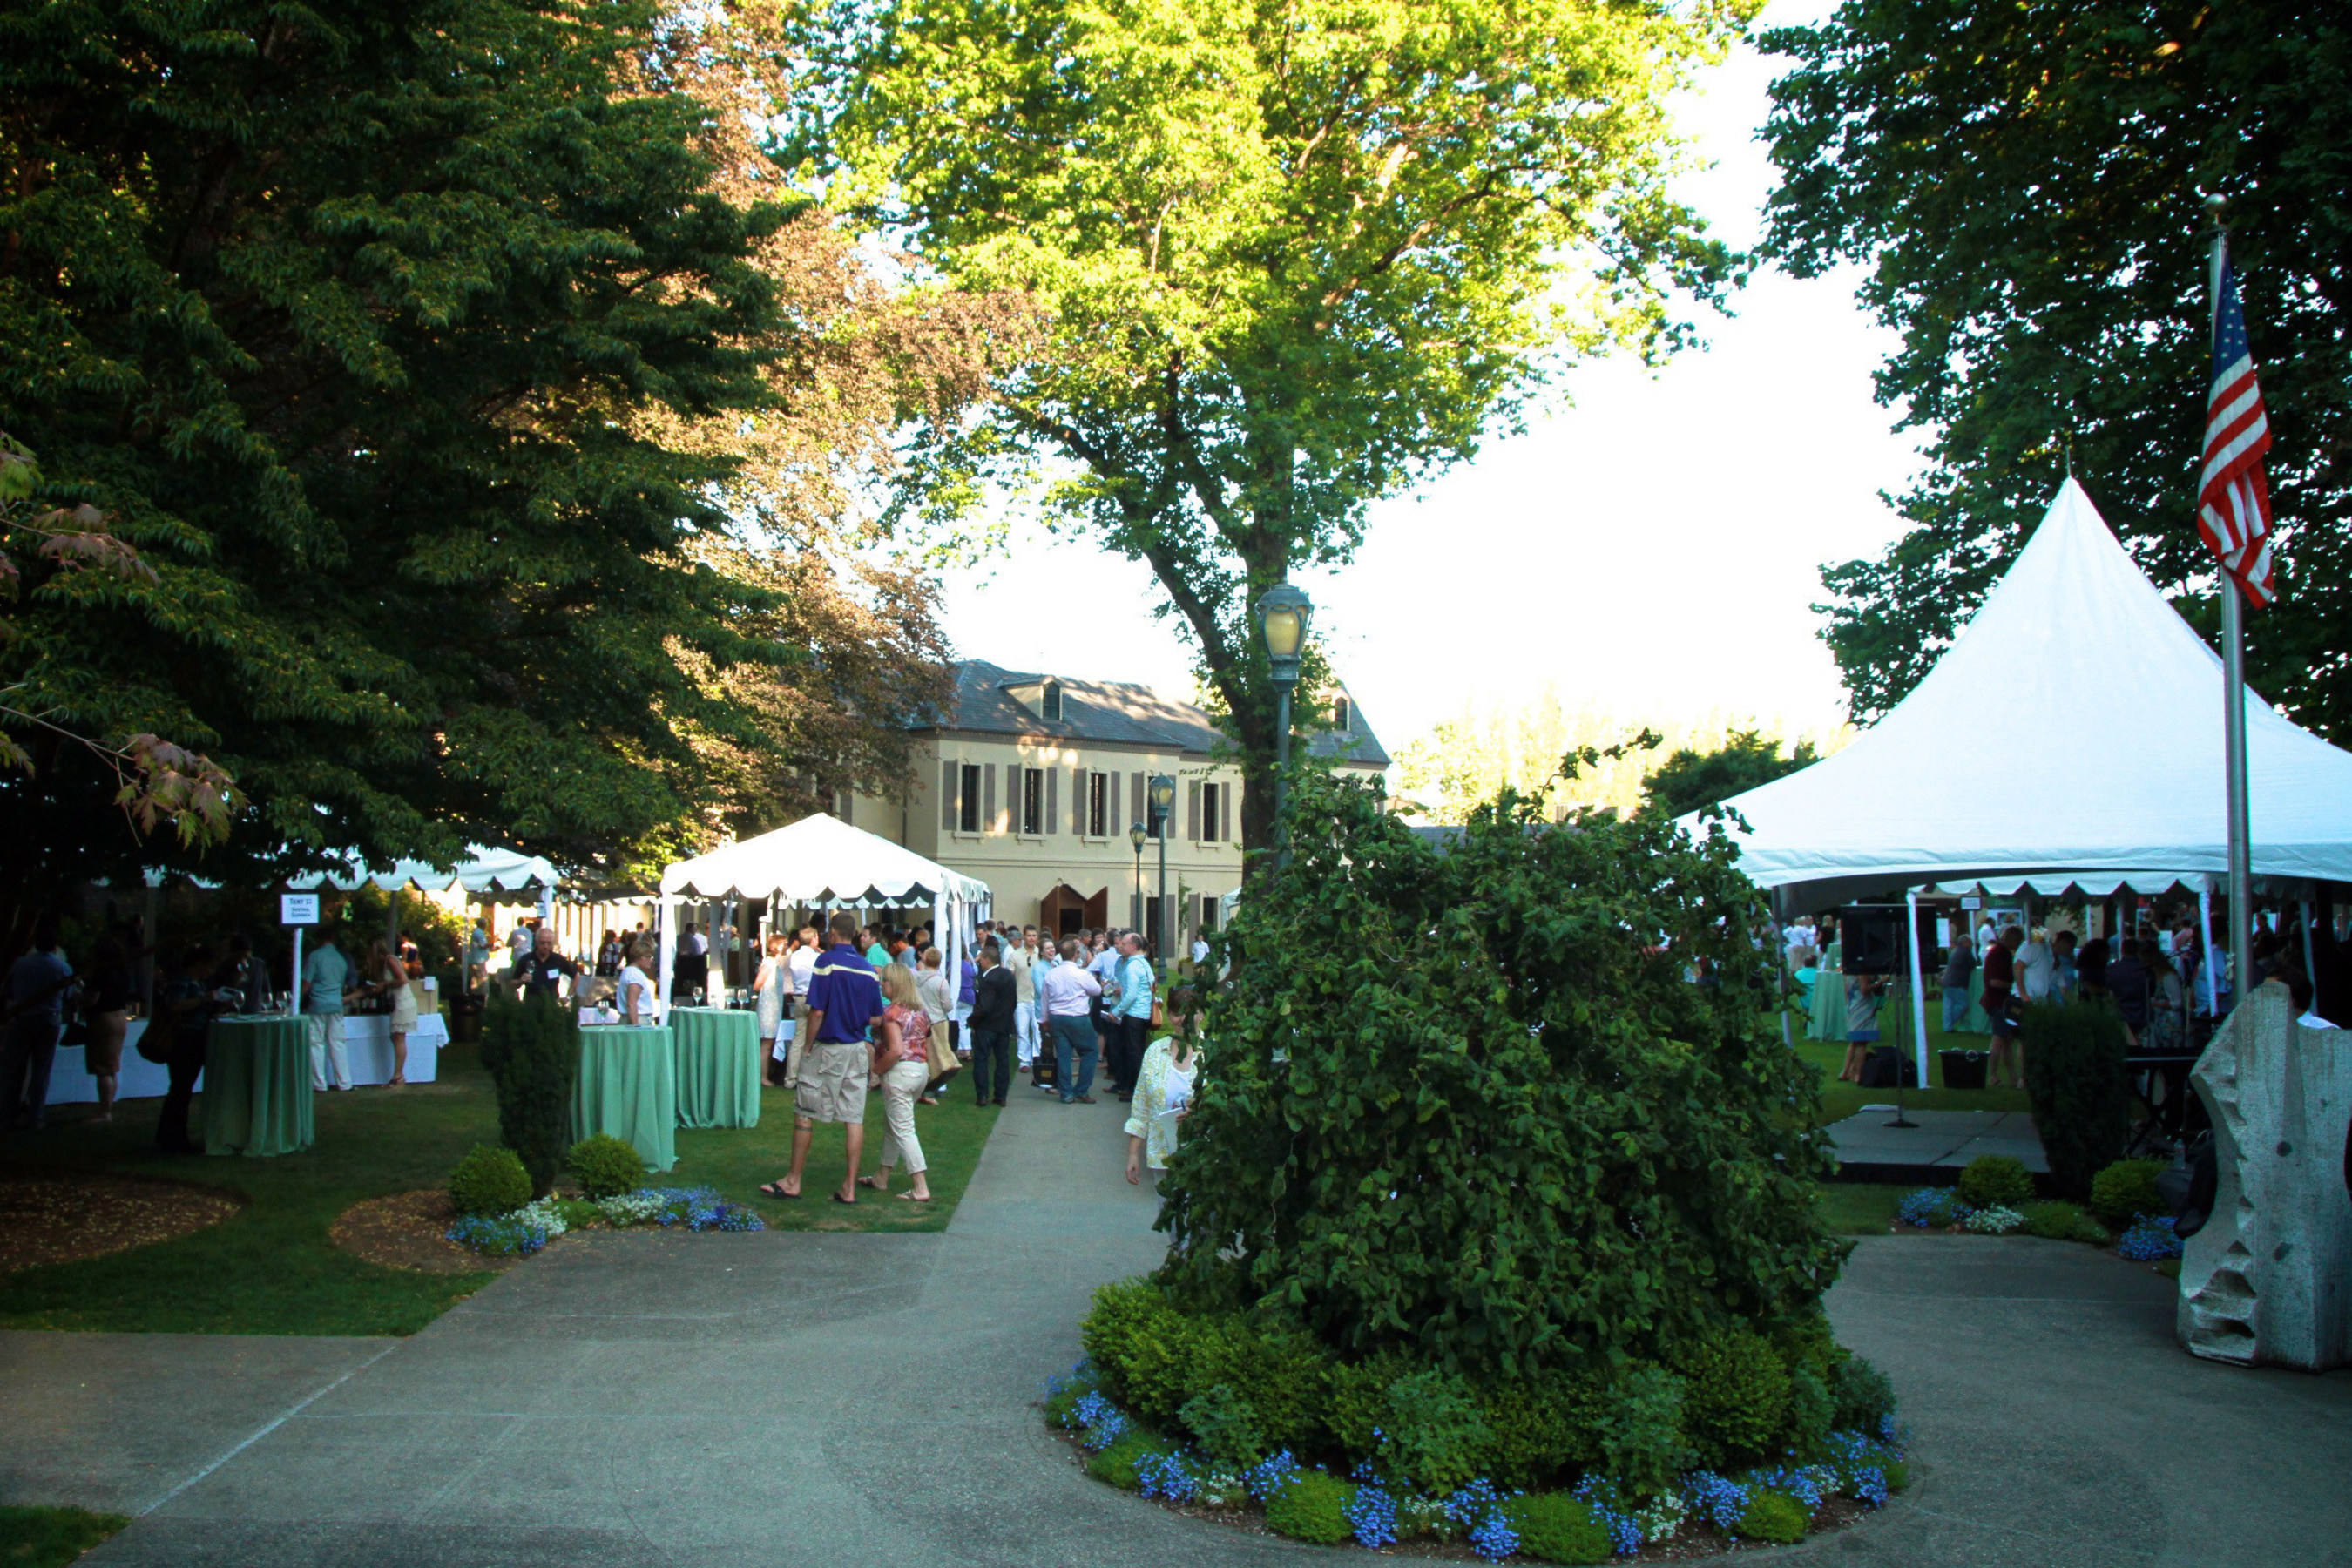 Sample the finest Rieslings from around the globe, mingle with winemakers, savor Riesling friendly cuisine by several of Seattle's popular food trucks and enjoy live music on the picturesque grounds of Chateau Ste. Michelle.